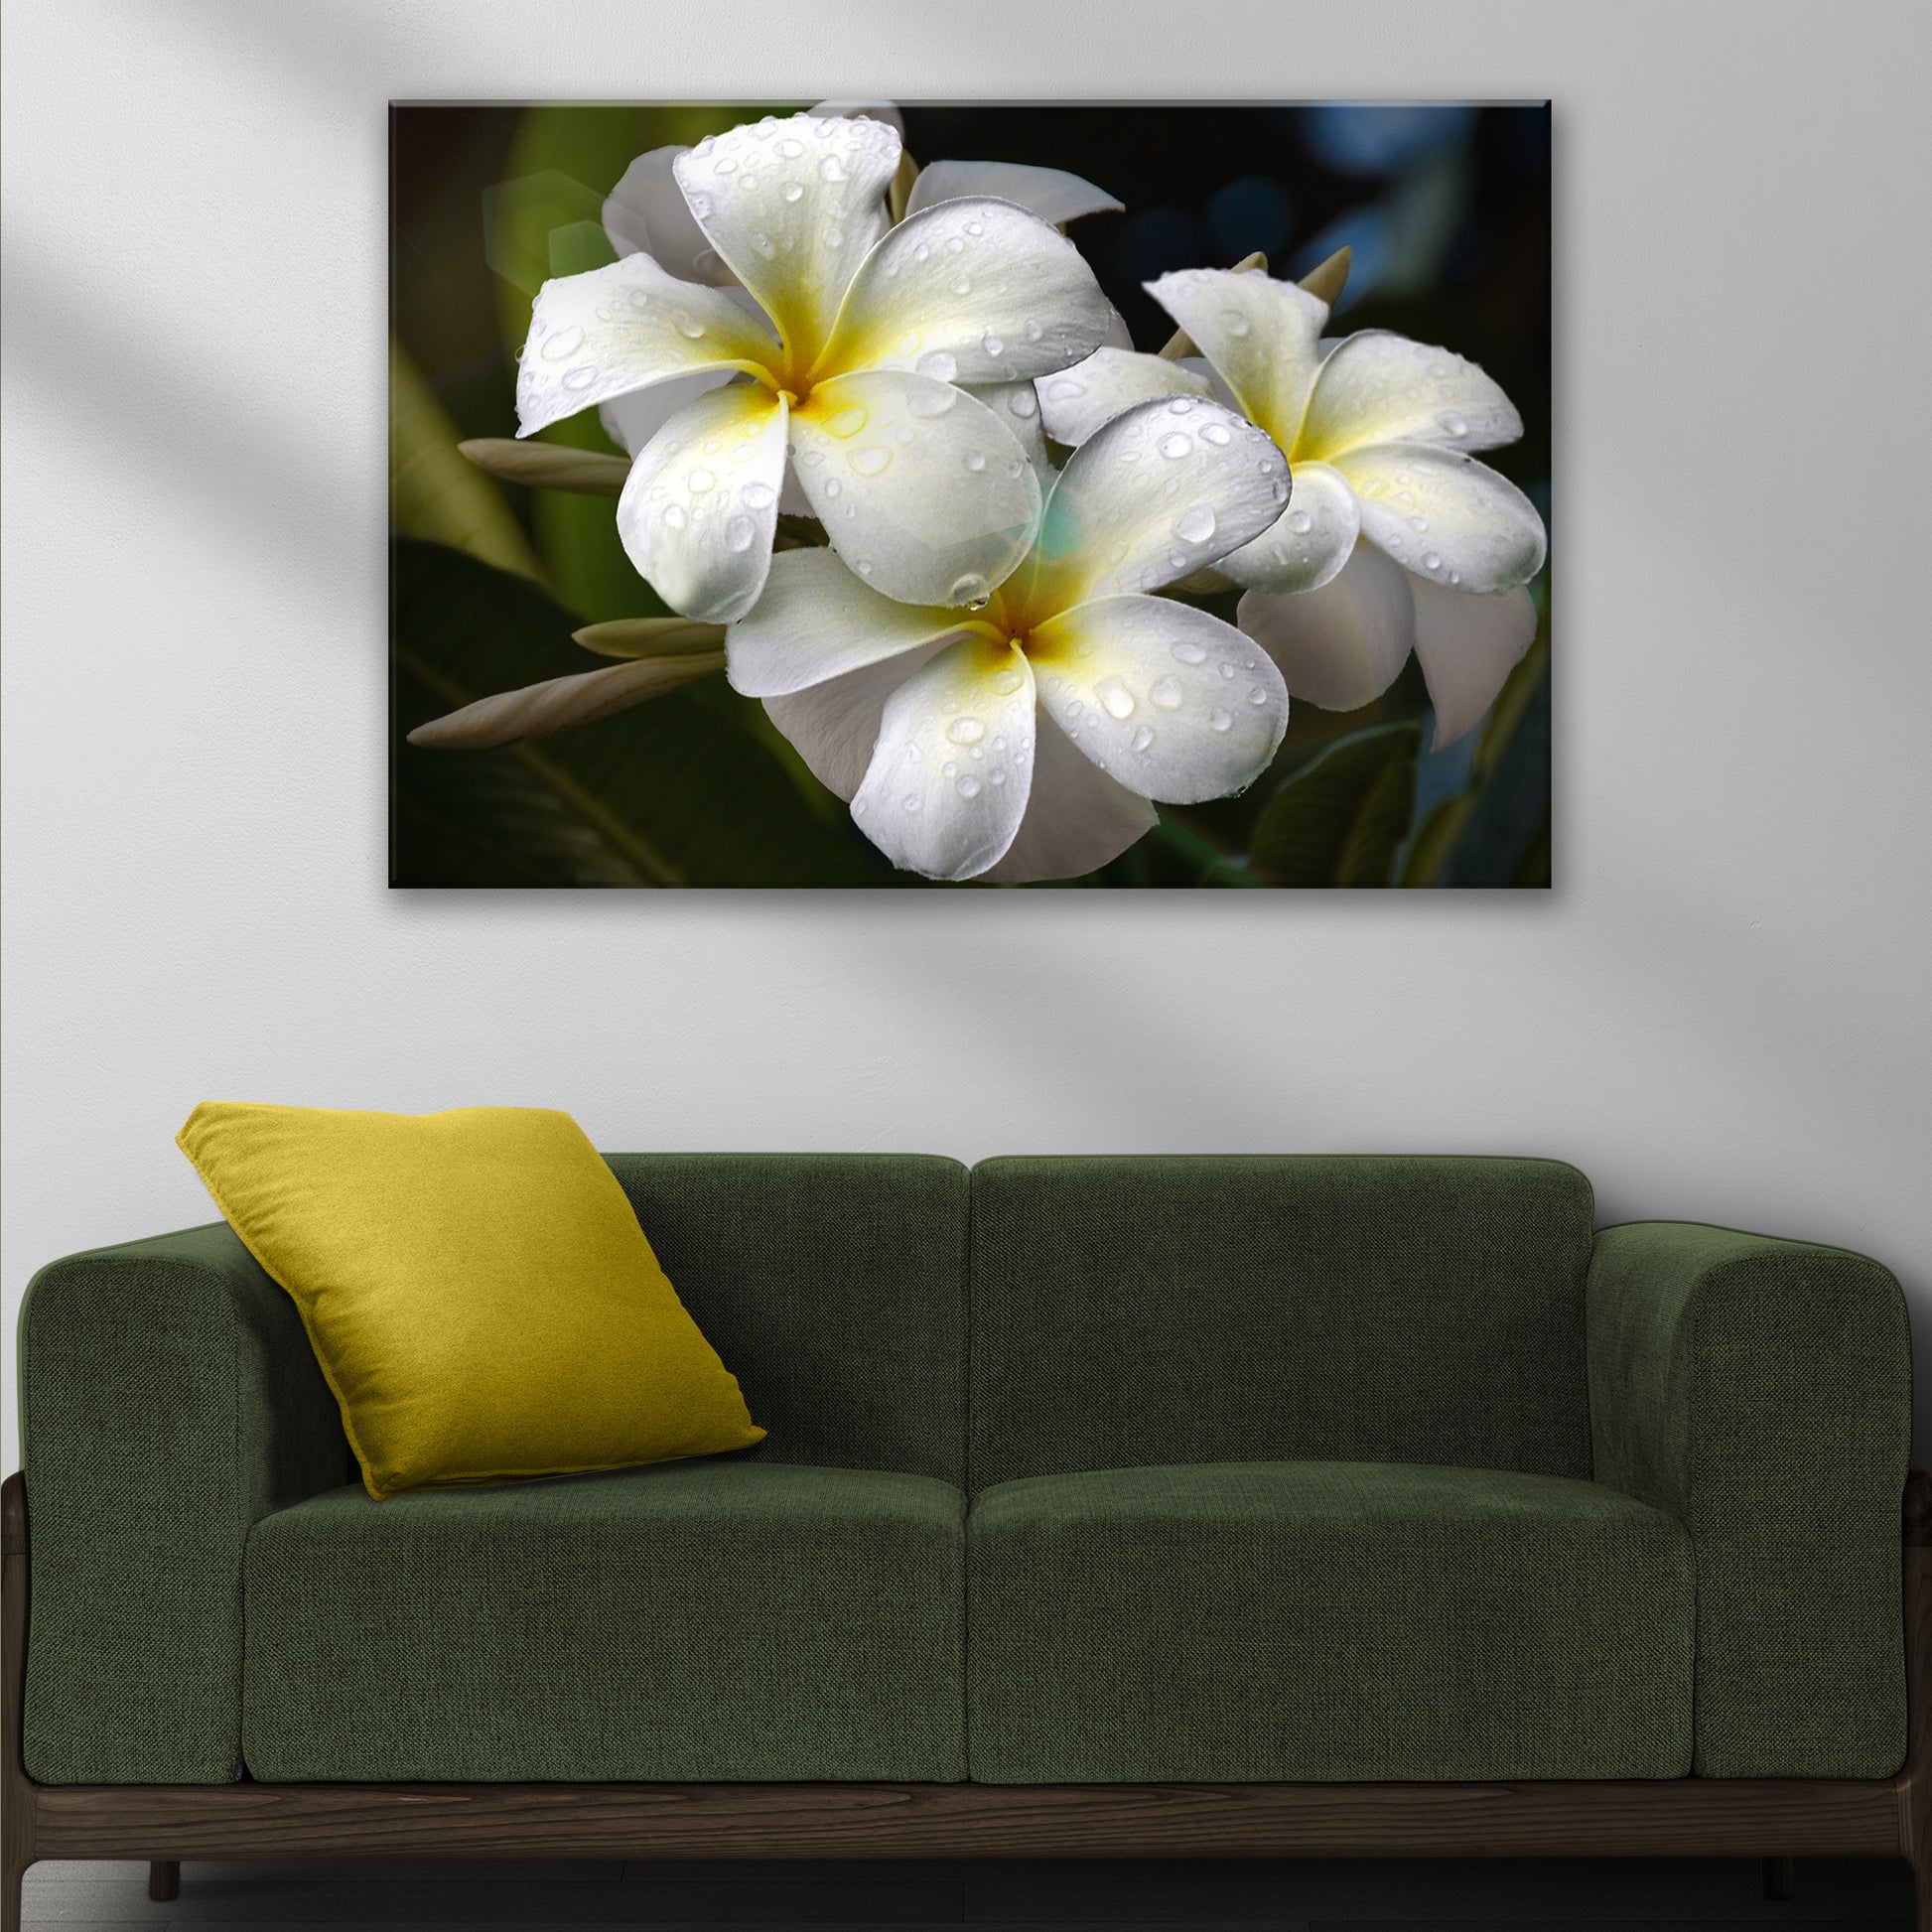 White Frangipani Flower Canvas Wall Art Style 1 - Image by Tailored Canvases